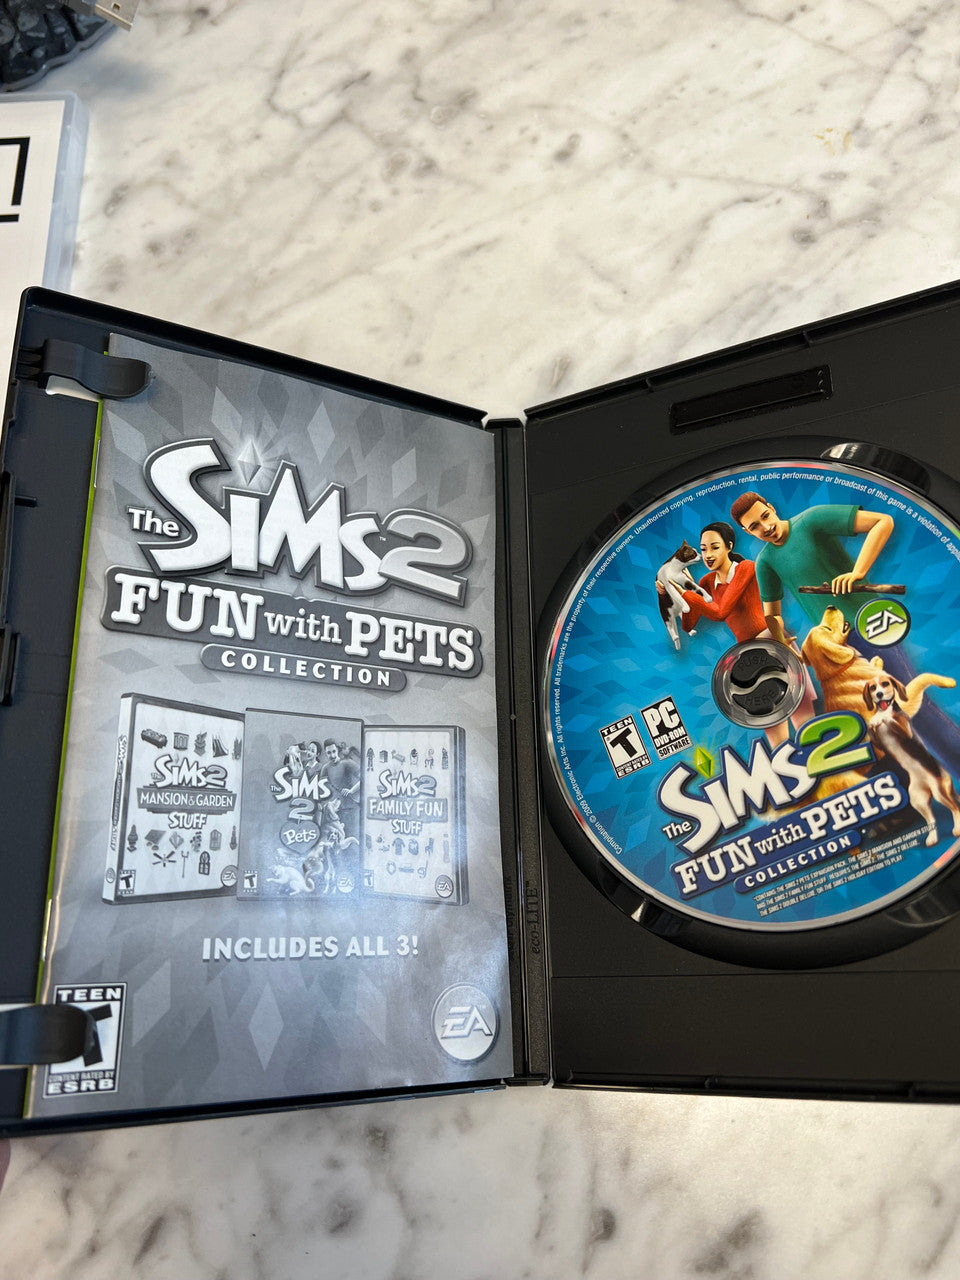 Sims 2: Fun With Pets Collection (PC, 2010) **COMPLETE COPY WITH CD KEY**